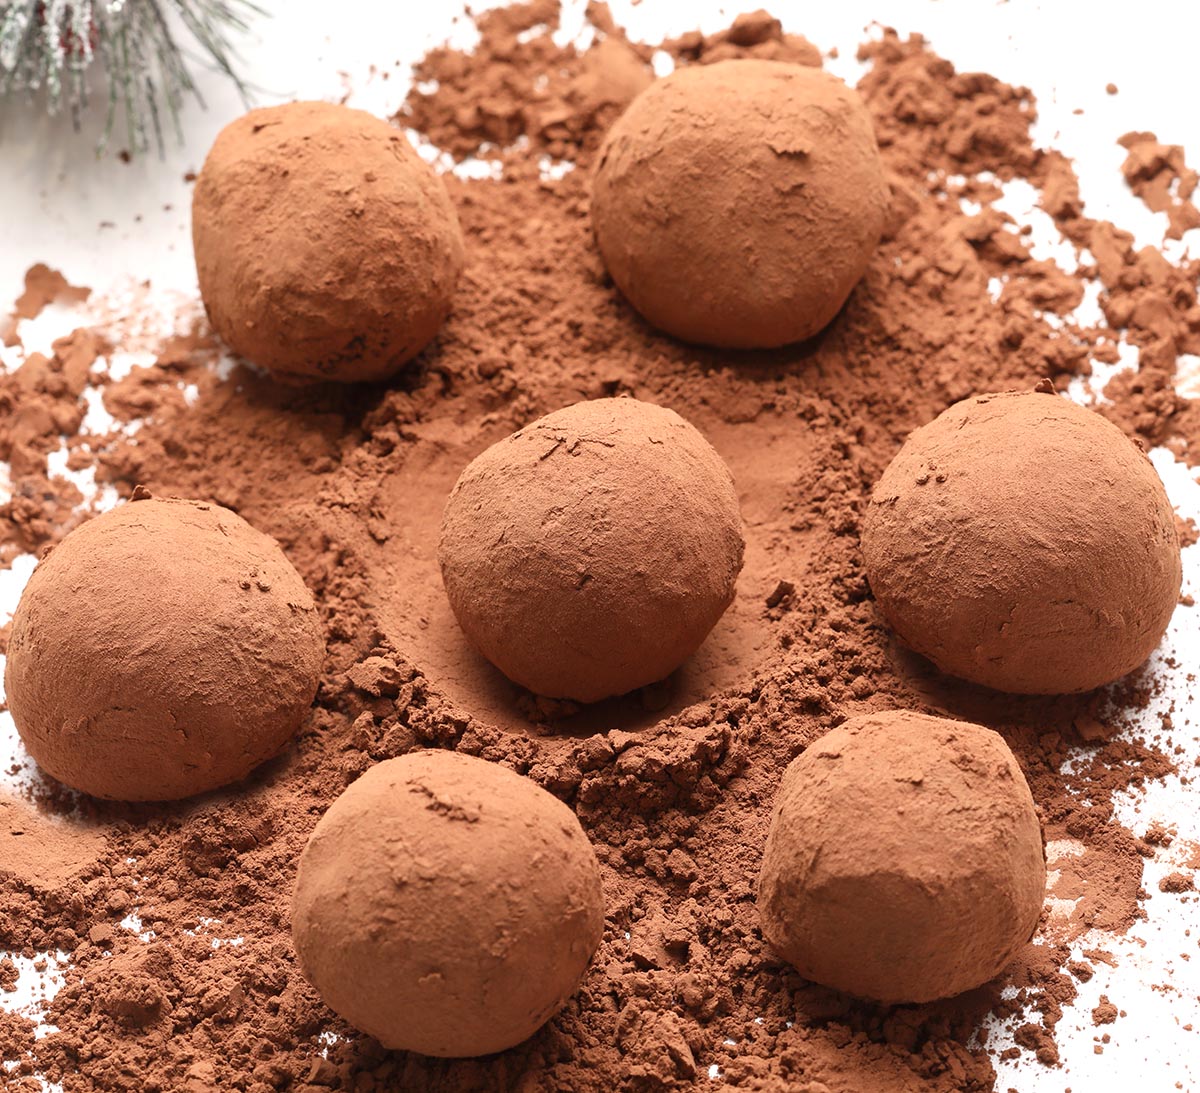 These Mexican Hot Chocolate Balls made with bittersweet chocolate, cinnamon, nutmeg and a hint of cayenne pepper or chili will warm you up this winter! Perfect for Christmas, Valentine’s Day....or a random winter day.